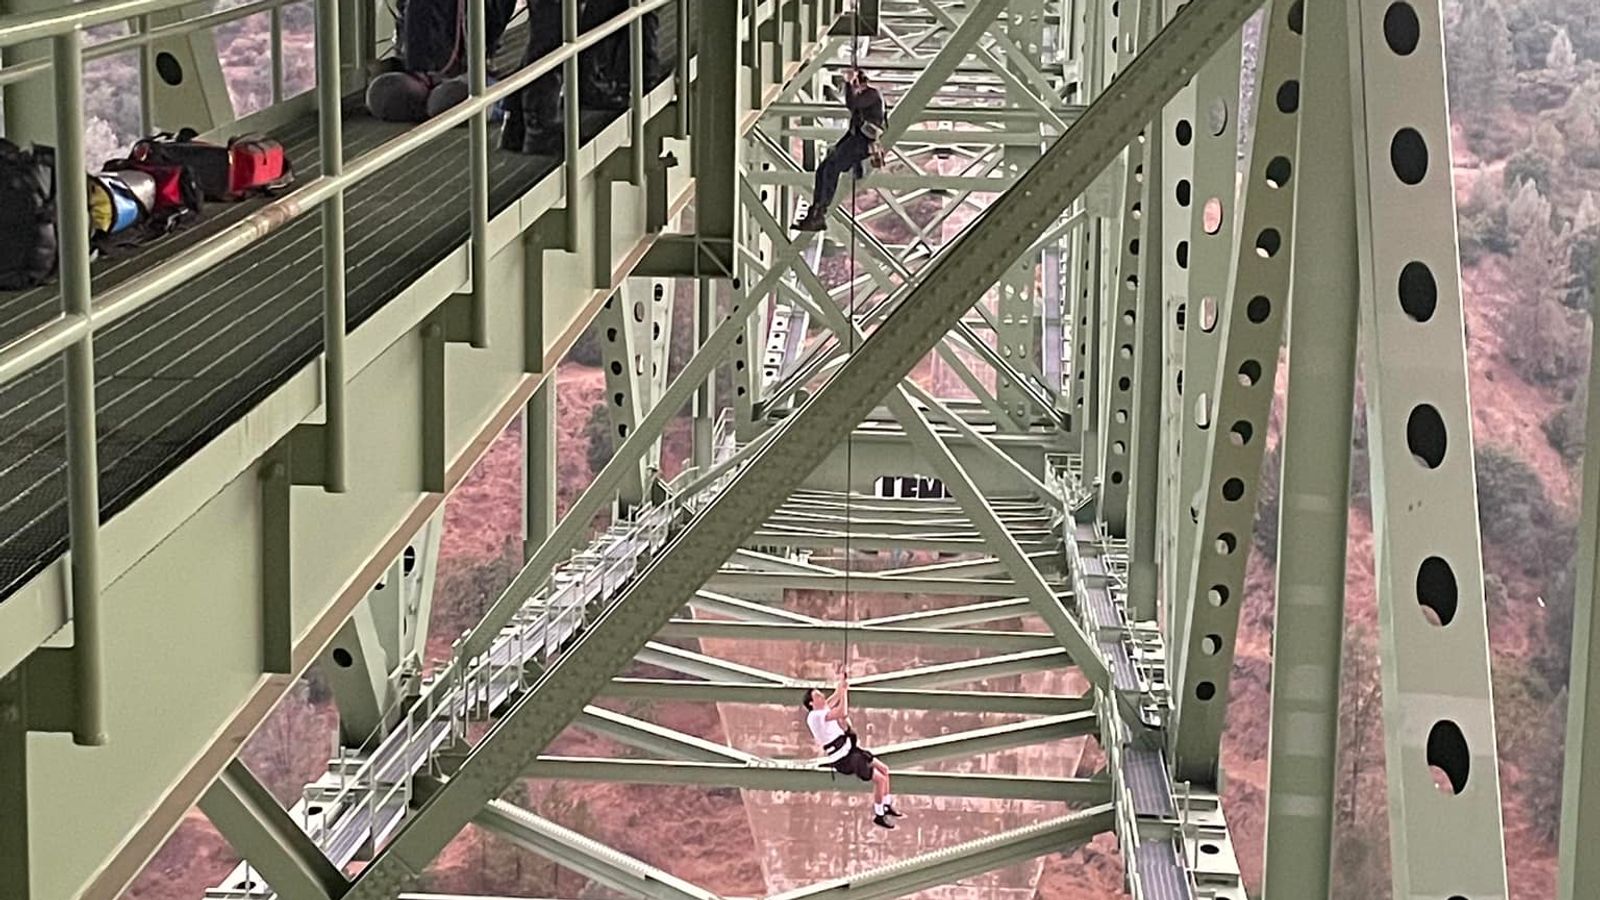 Teenager rescued from California's tallest bridge after getting stuck filming stunt 700ft in the air